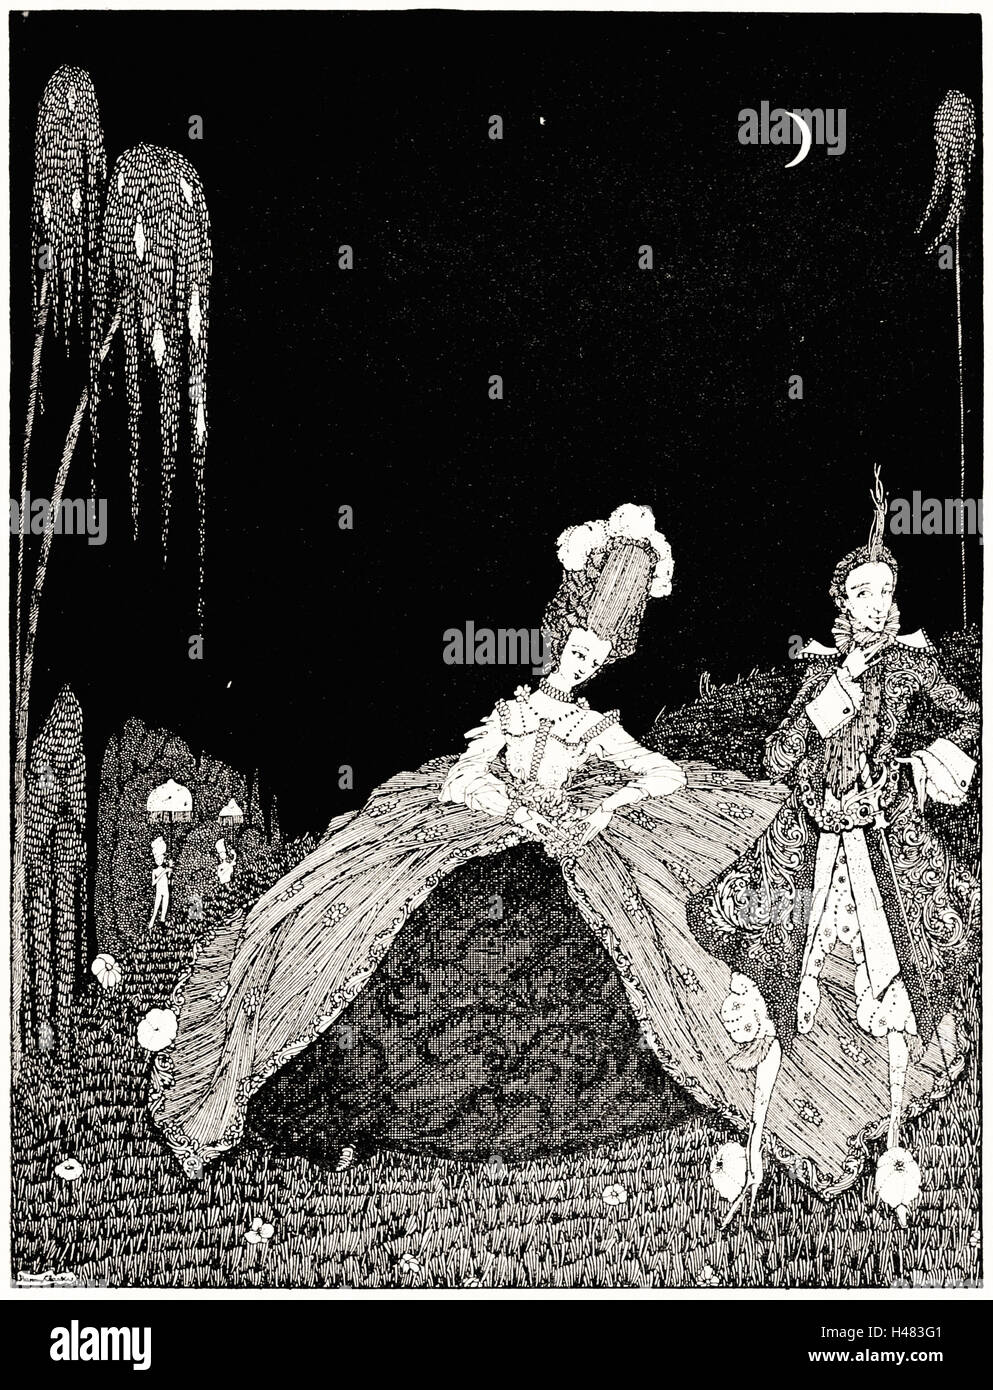 Harry Clarke - Page 99 illustration from Fairy tales of Charles Perrault (Clarke, 1922) Stock Photo